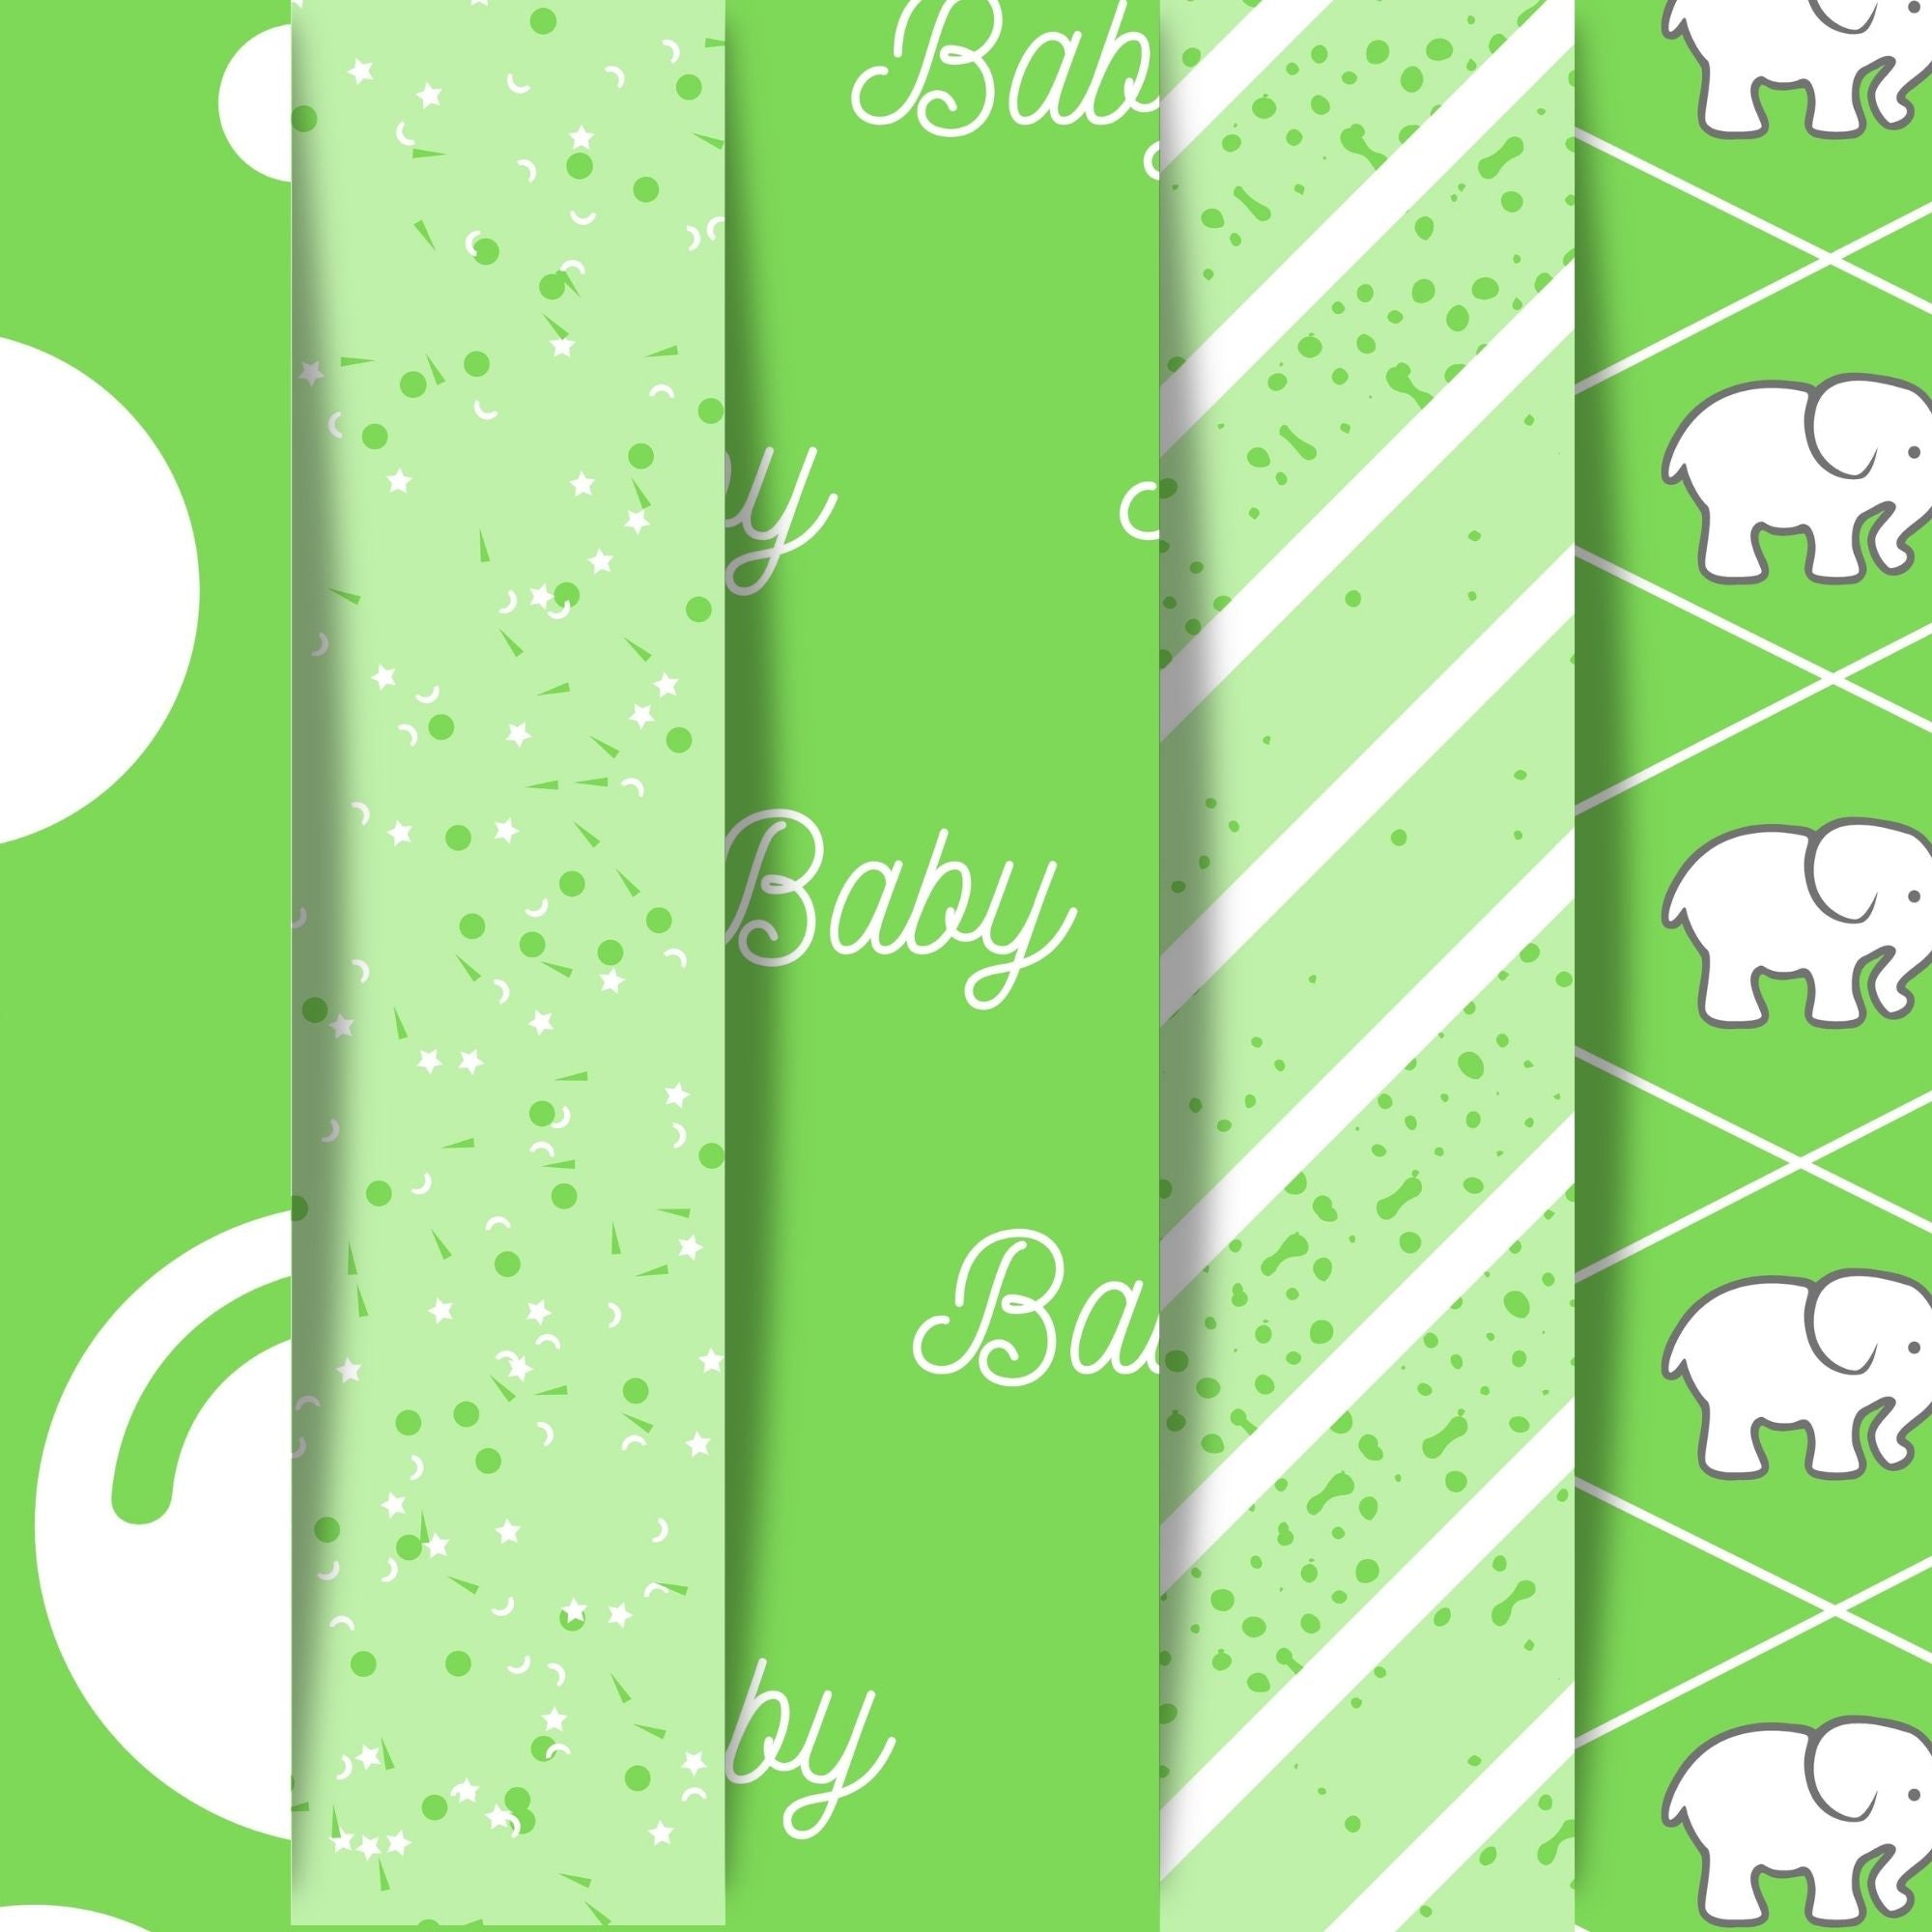 Scrapbookers, this is what you've been looking for! This green themed baby bundle has 30 unique images that can be printed or used as digital backgrounds.